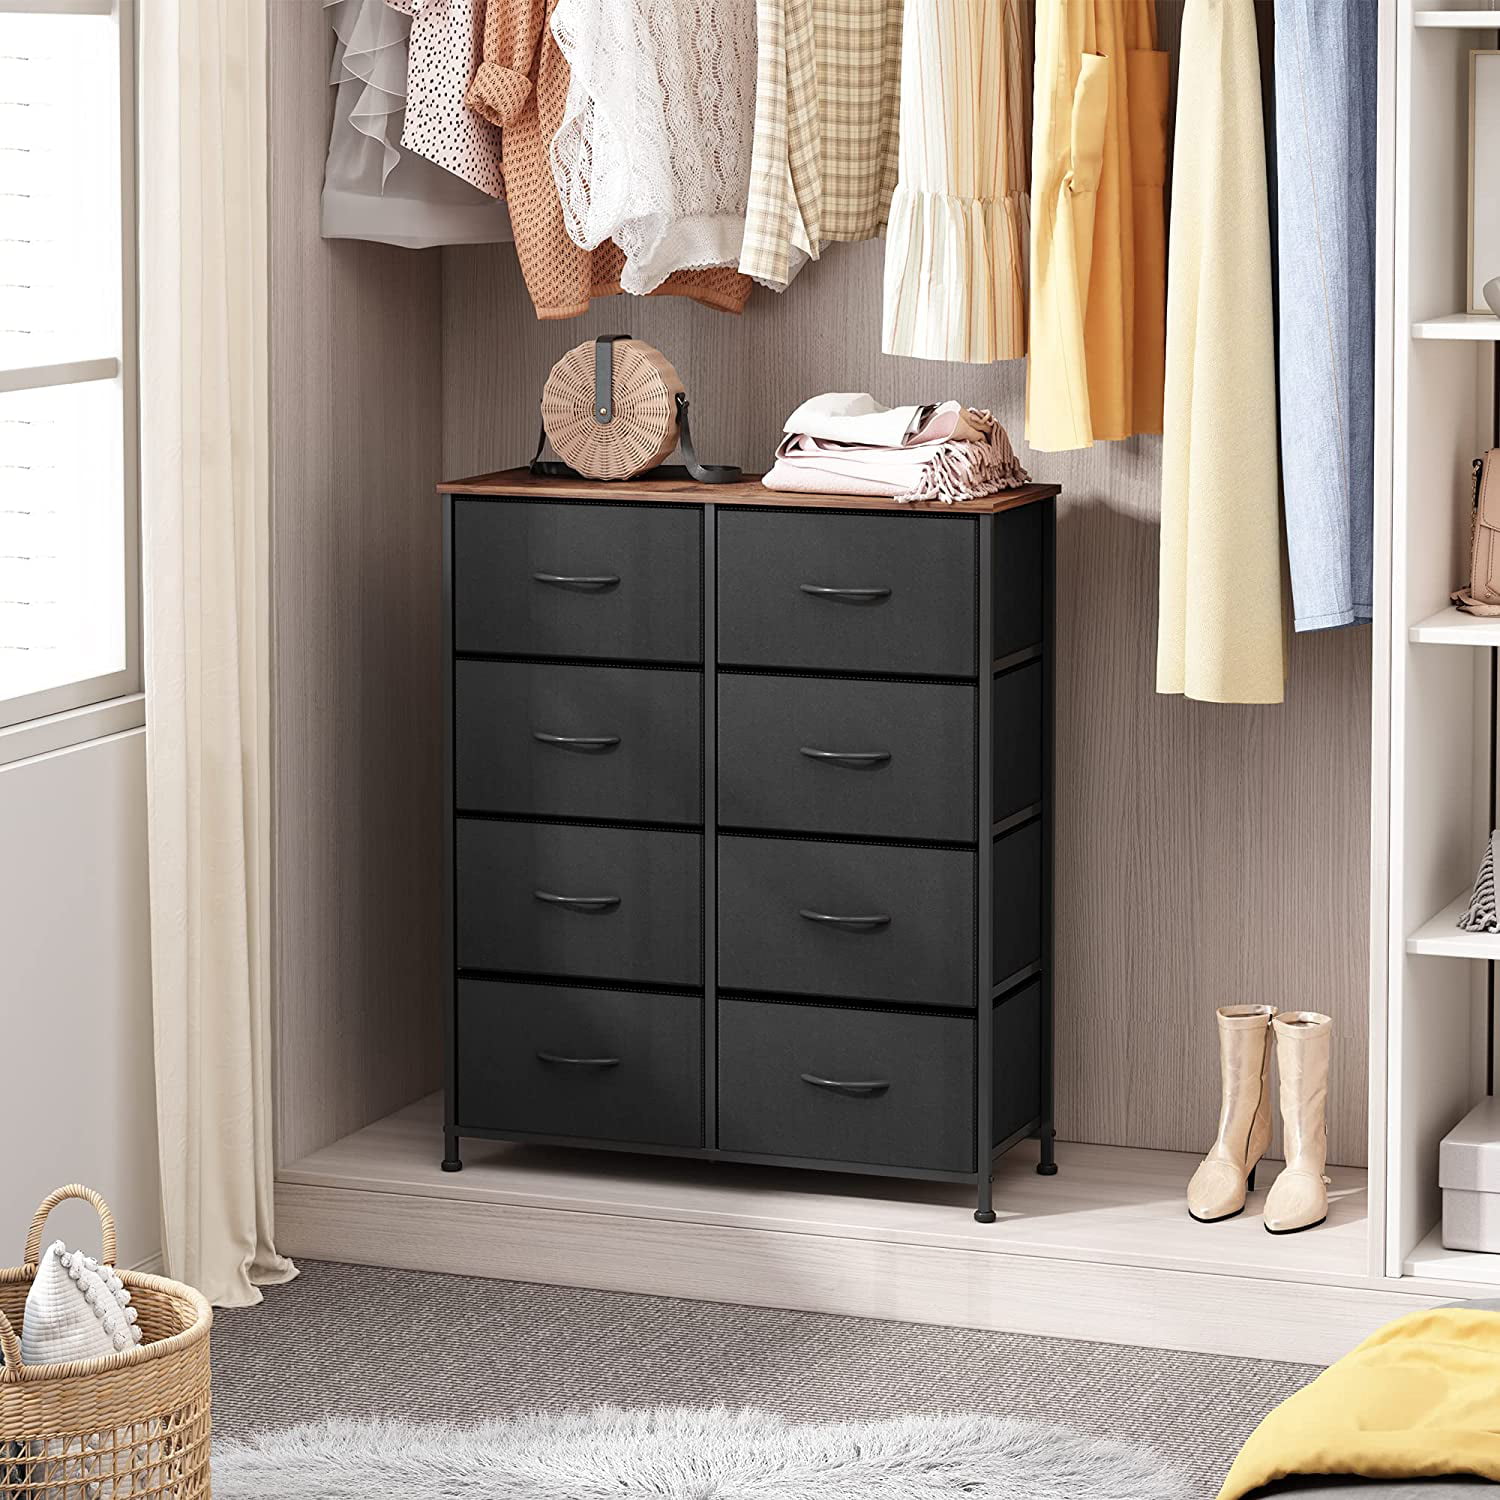 Closets Wood Top Metal Frame Easy Pull Handle Storage Chest for Bedroom Entryway Charcoal Black Nursery Textured Print Drawers Hallway WLIVE Fabric Dresser with 8 Drawers